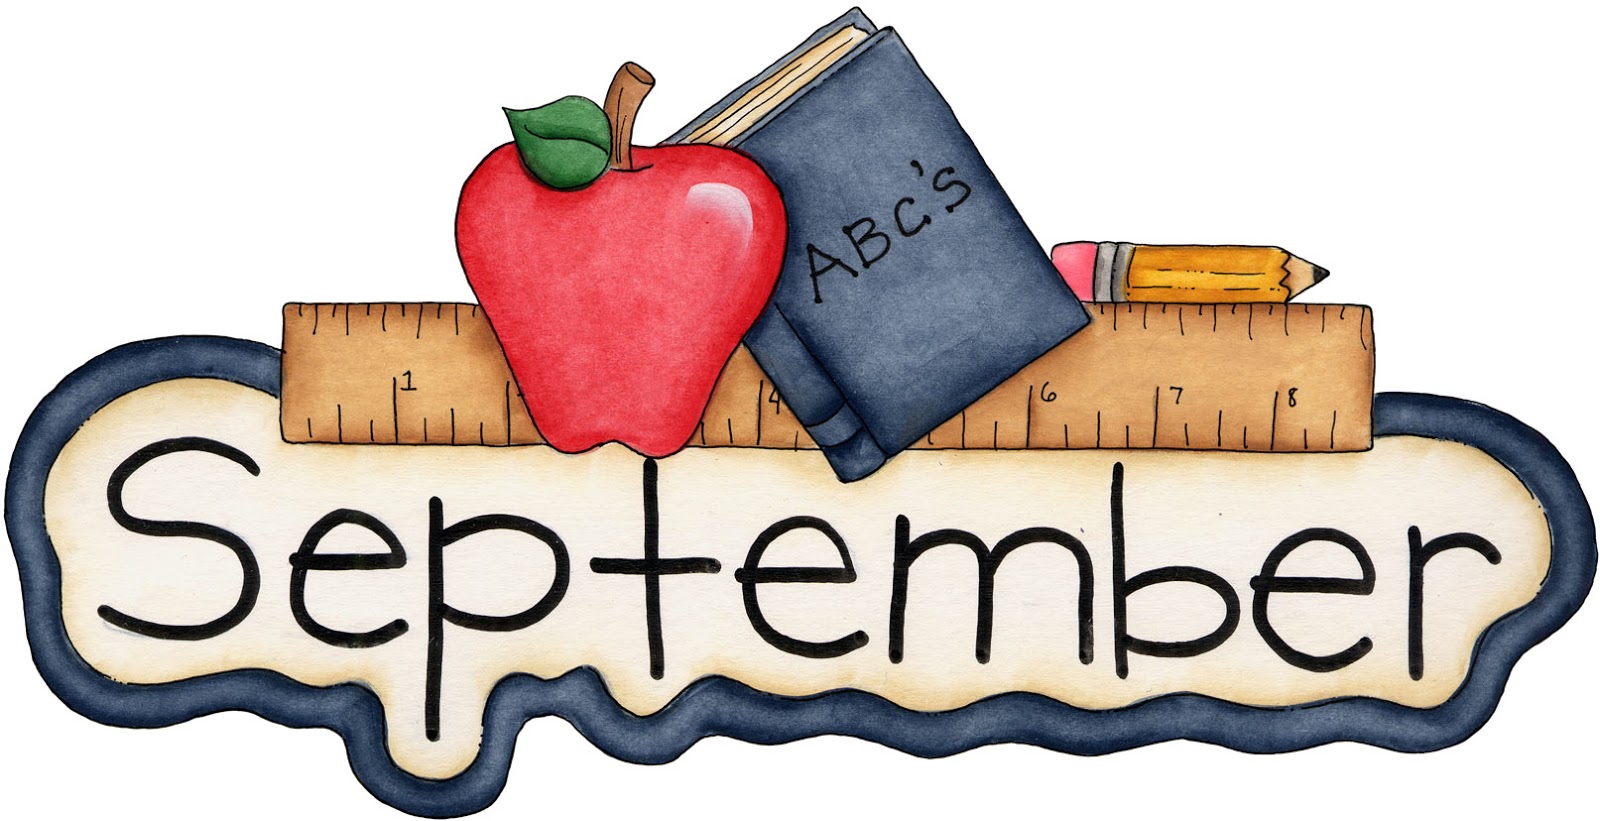 September clipart free clip a